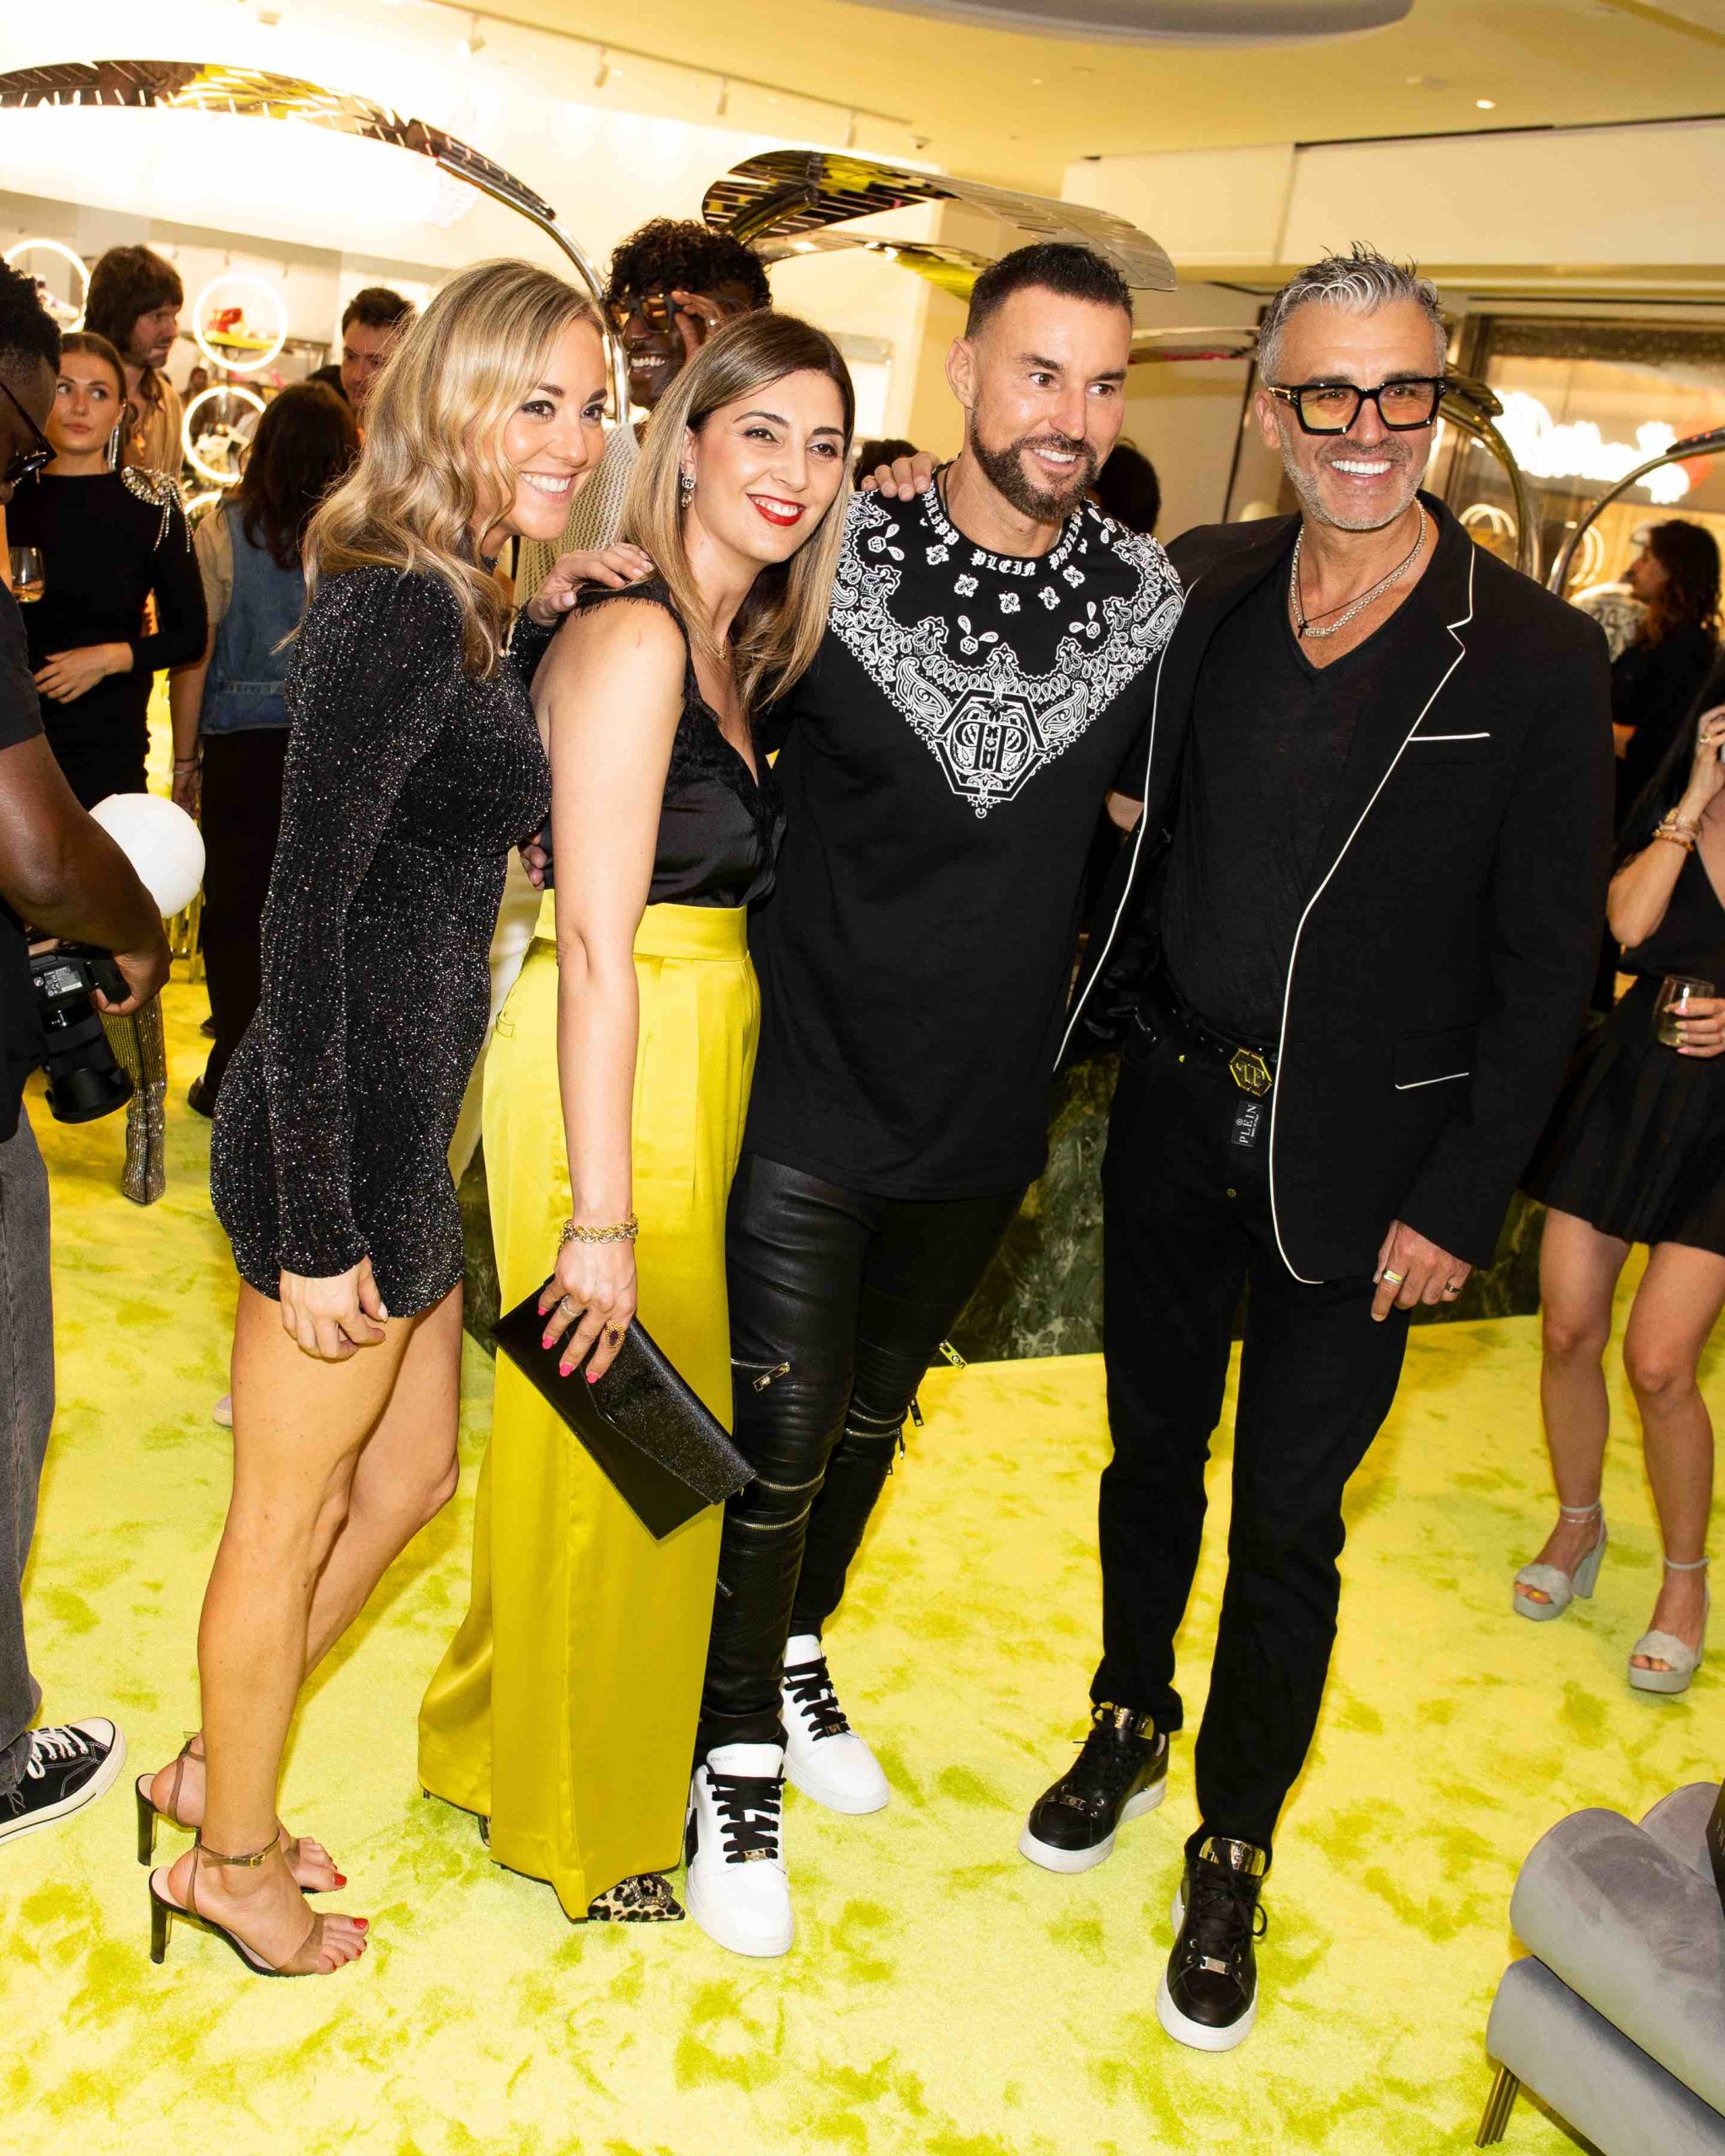 Philipp Plein Goes Bicoastal by Adding New Stores in Los Angeles